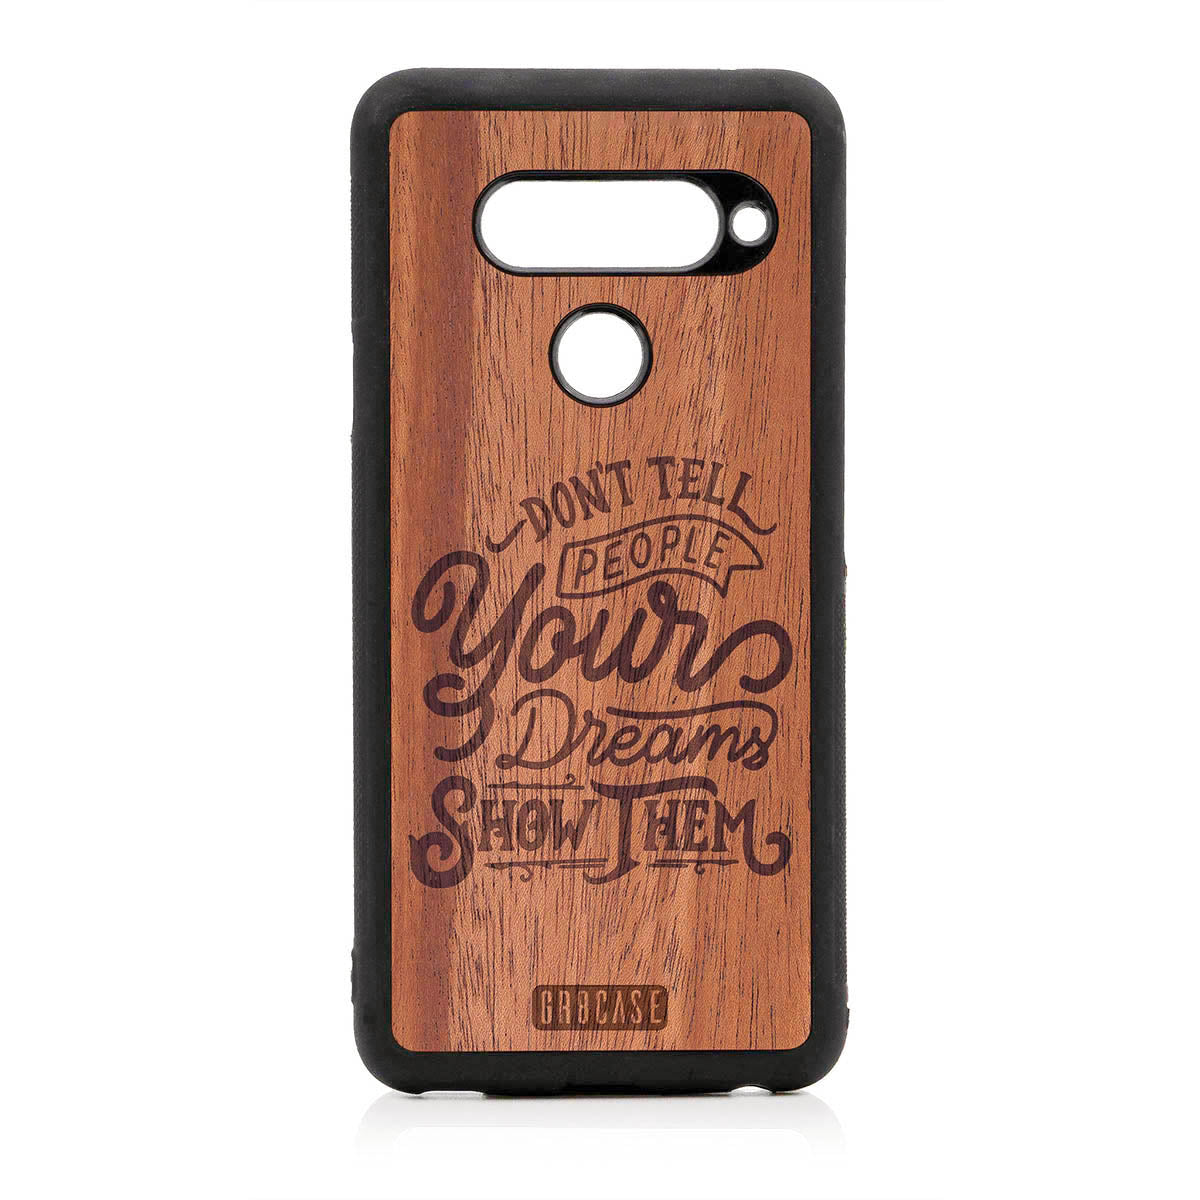 Don't Tell People Your Dreams Show Them Design Wood Case For LG V40 by GR8CASE